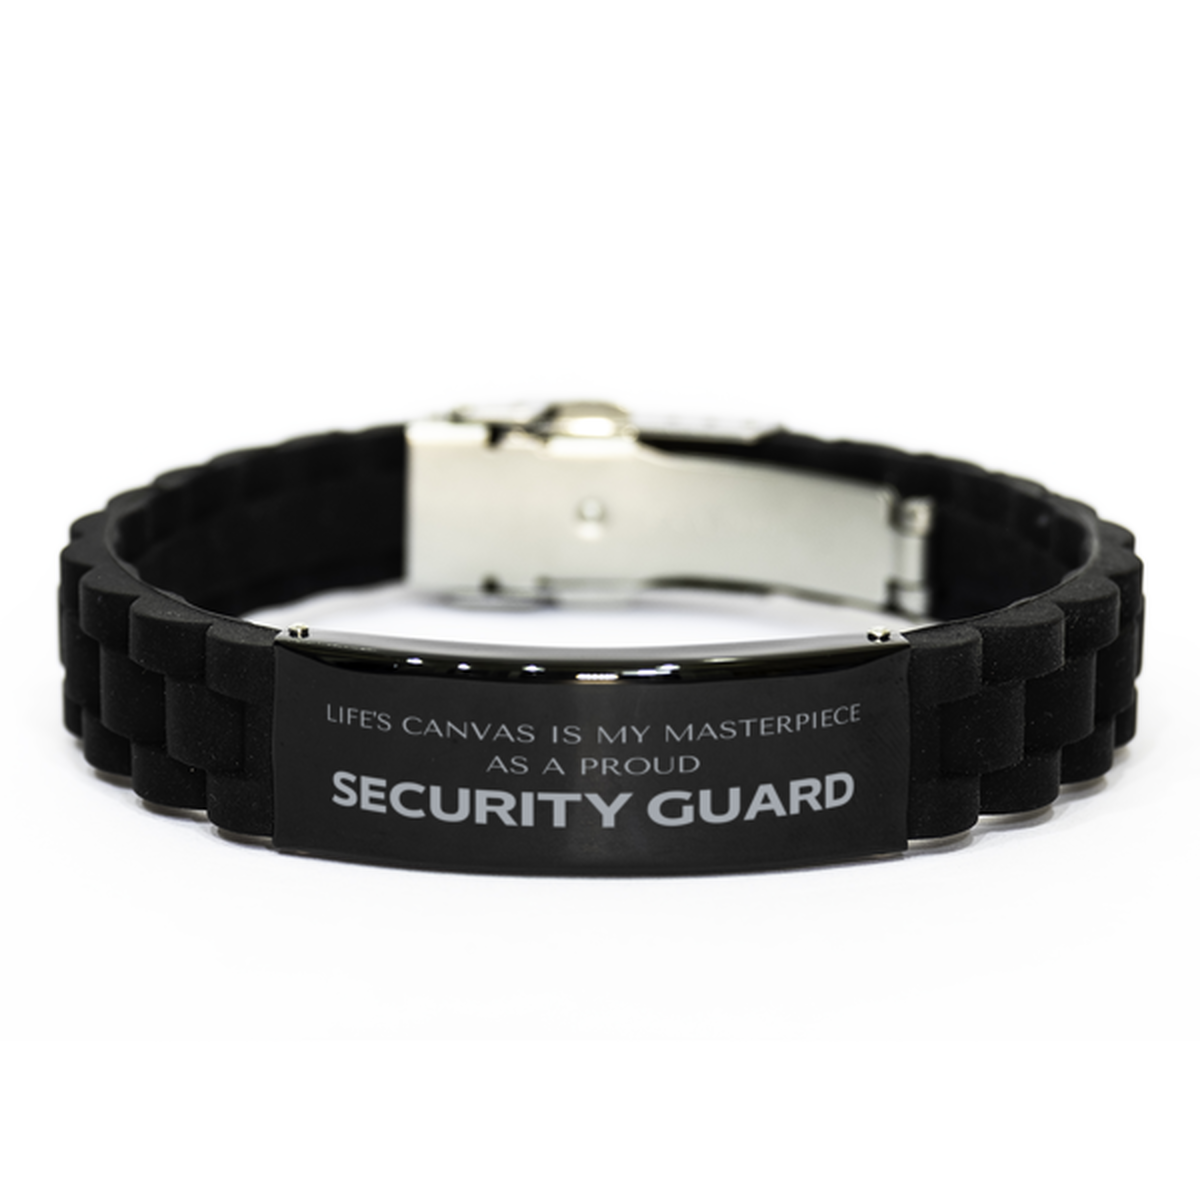 Proud Security Guard Gifts, Life's canvas is my masterpiece, Epic Birthday Christmas Unique Black Glidelock Clasp Bracelet For Security Guard, Coworkers, Men, Women, Friends